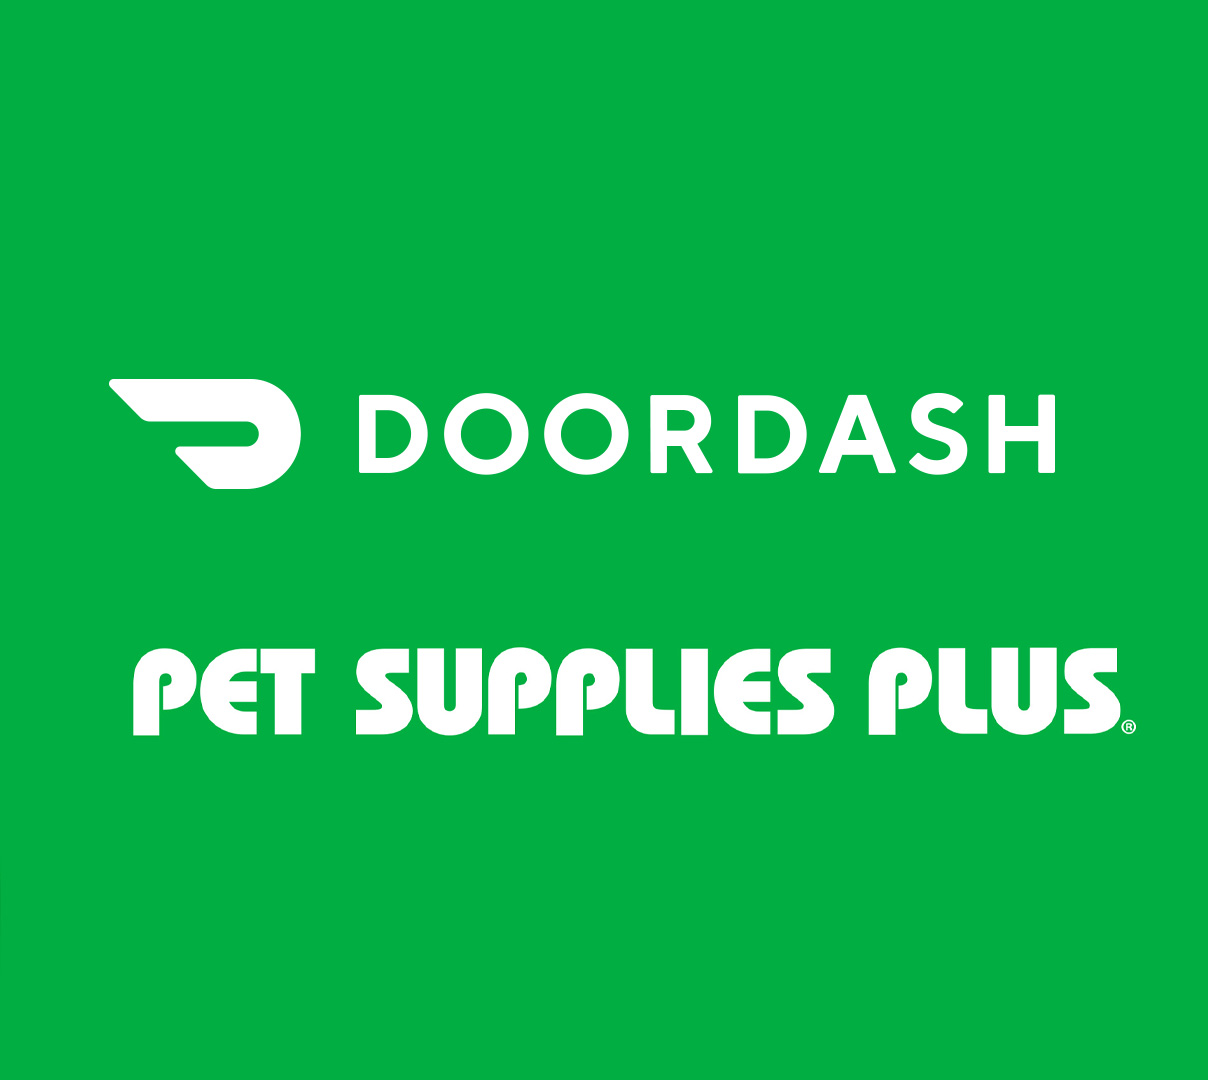 DoorDash Announces Partnership with Pet Supplies Plus for On-Demand Delivery